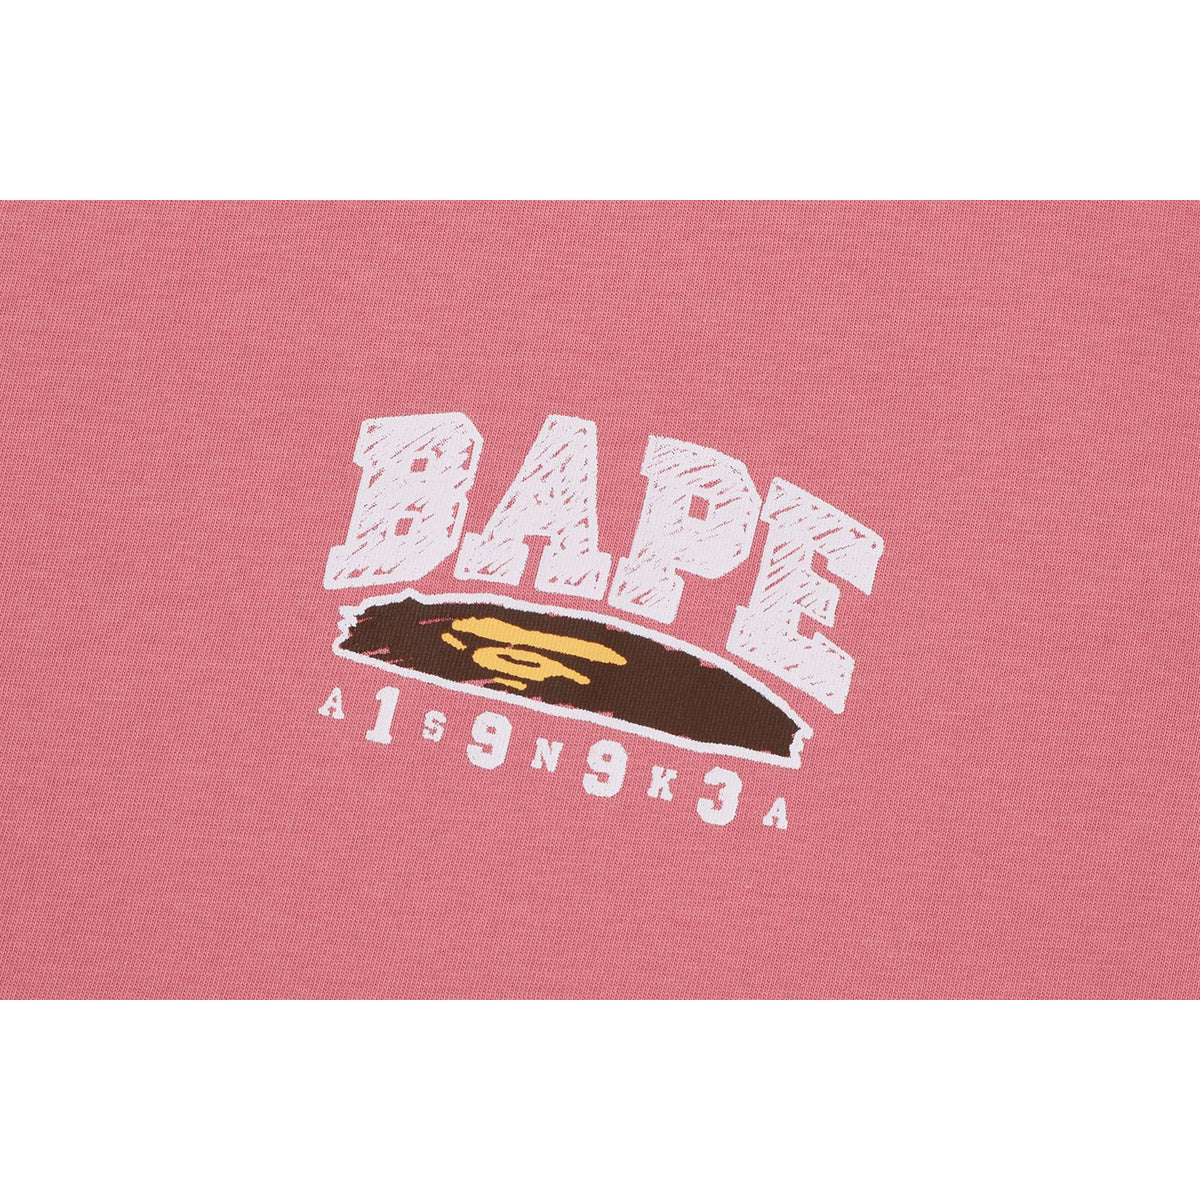 HAND DRAW BAPE RELAXED FIT TEE MENS